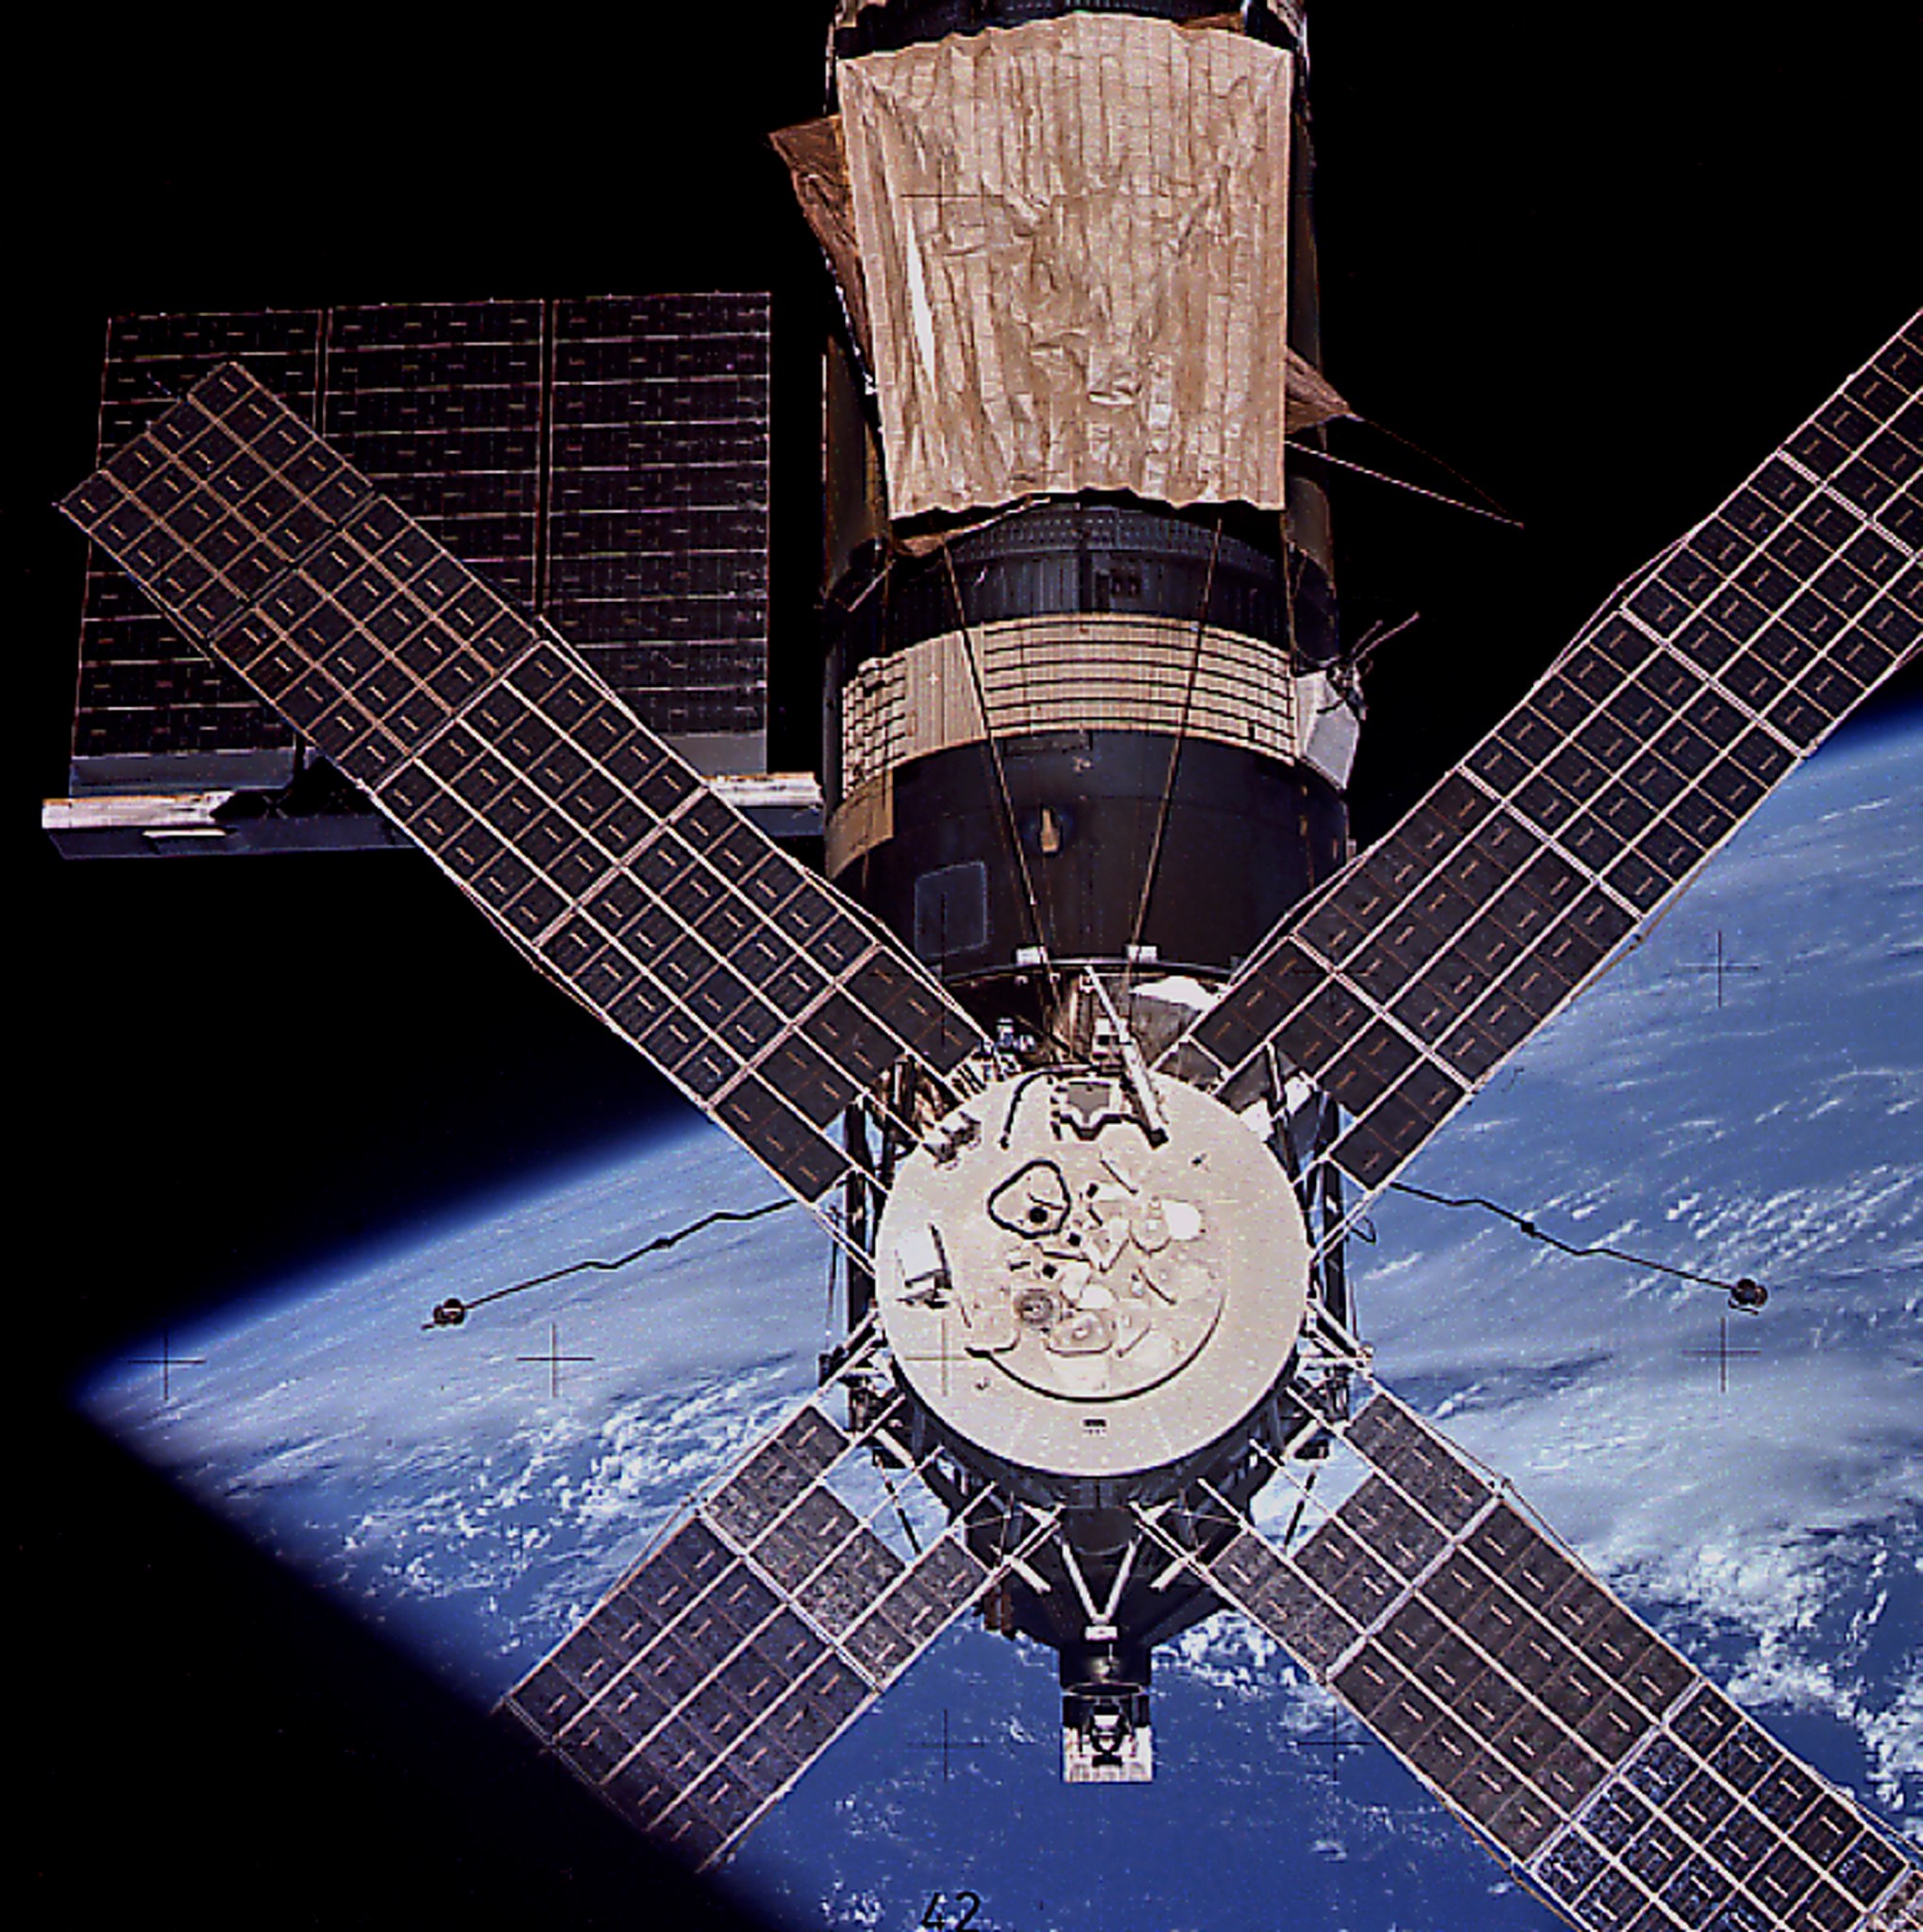 This week in 1973, Skylab's third and final crewed mission, launched to America's first space station. 